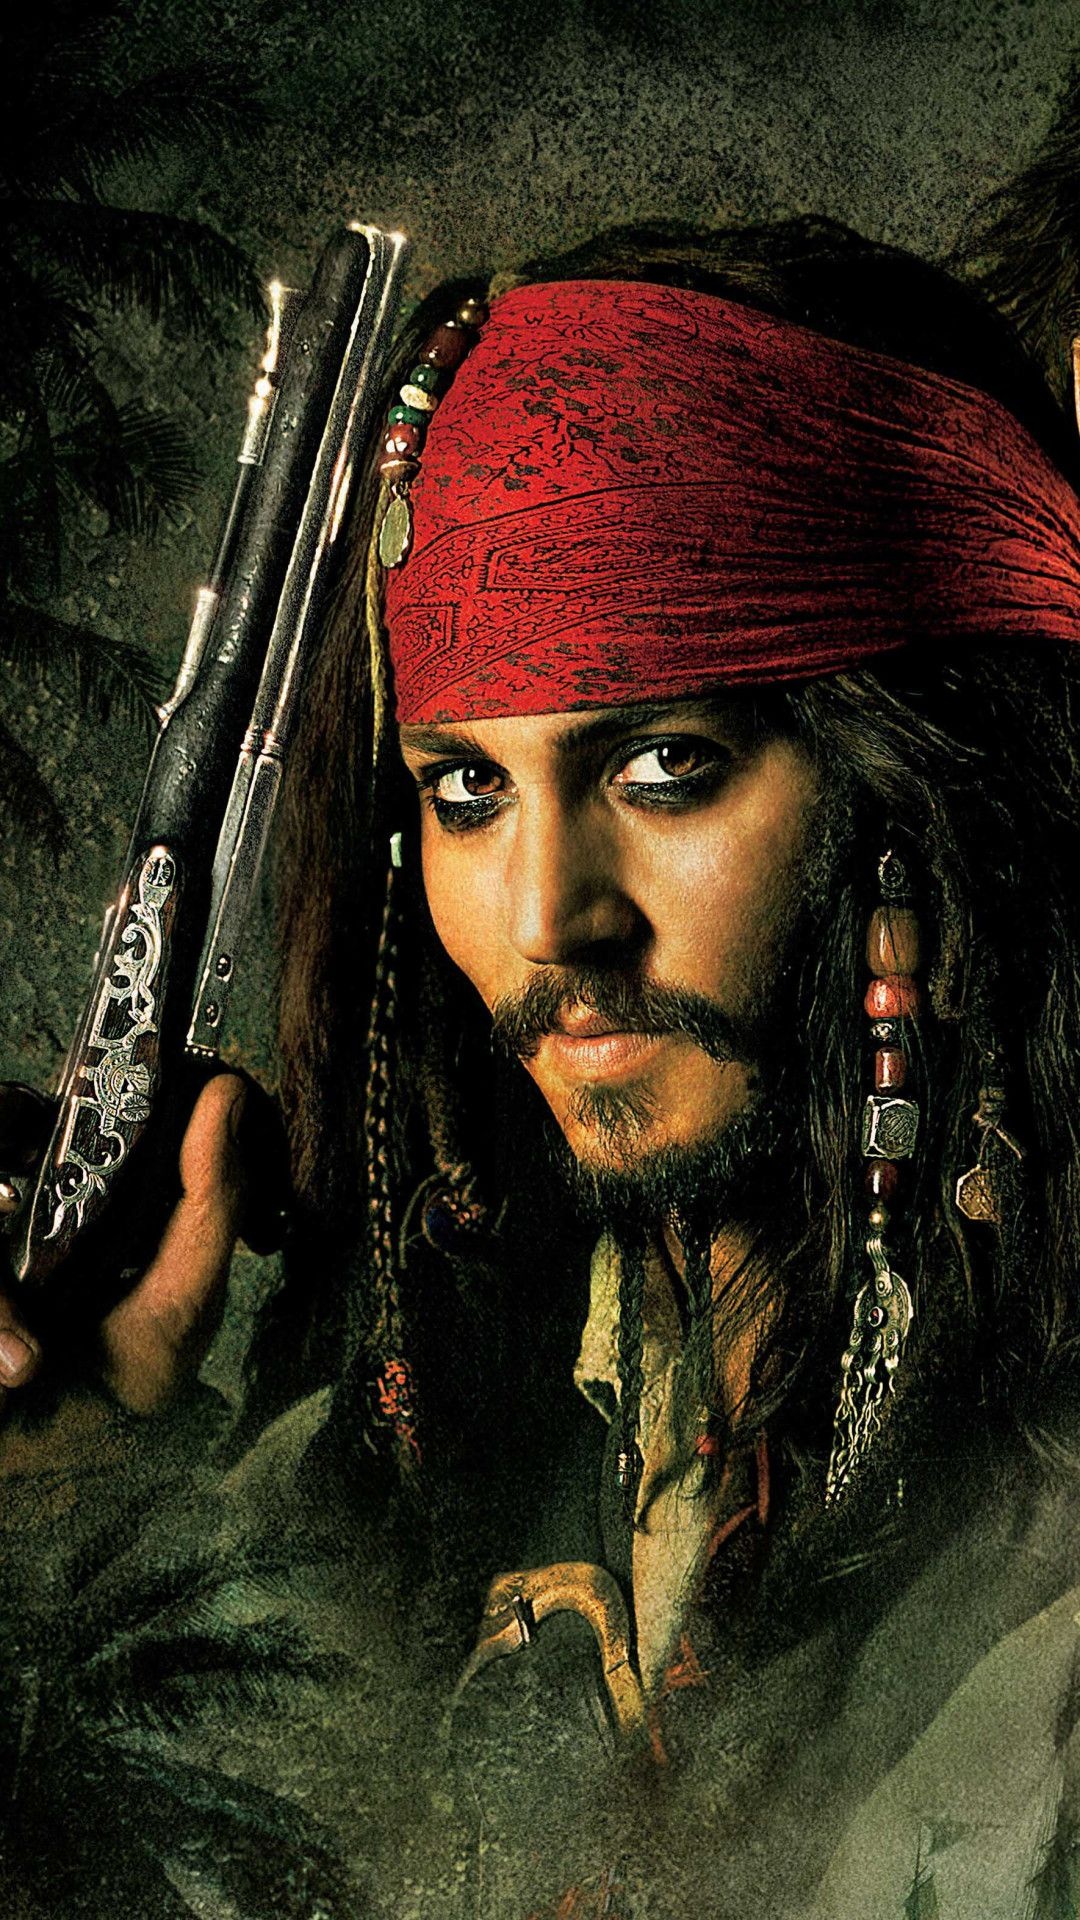 Pirates of the Caribbean: Jack Sparrow, introduced seeking to regain his ship, the Black Pearl, from his mutinous first mate, Hector Barbossa. 1080x1920 Full HD Wallpaper.